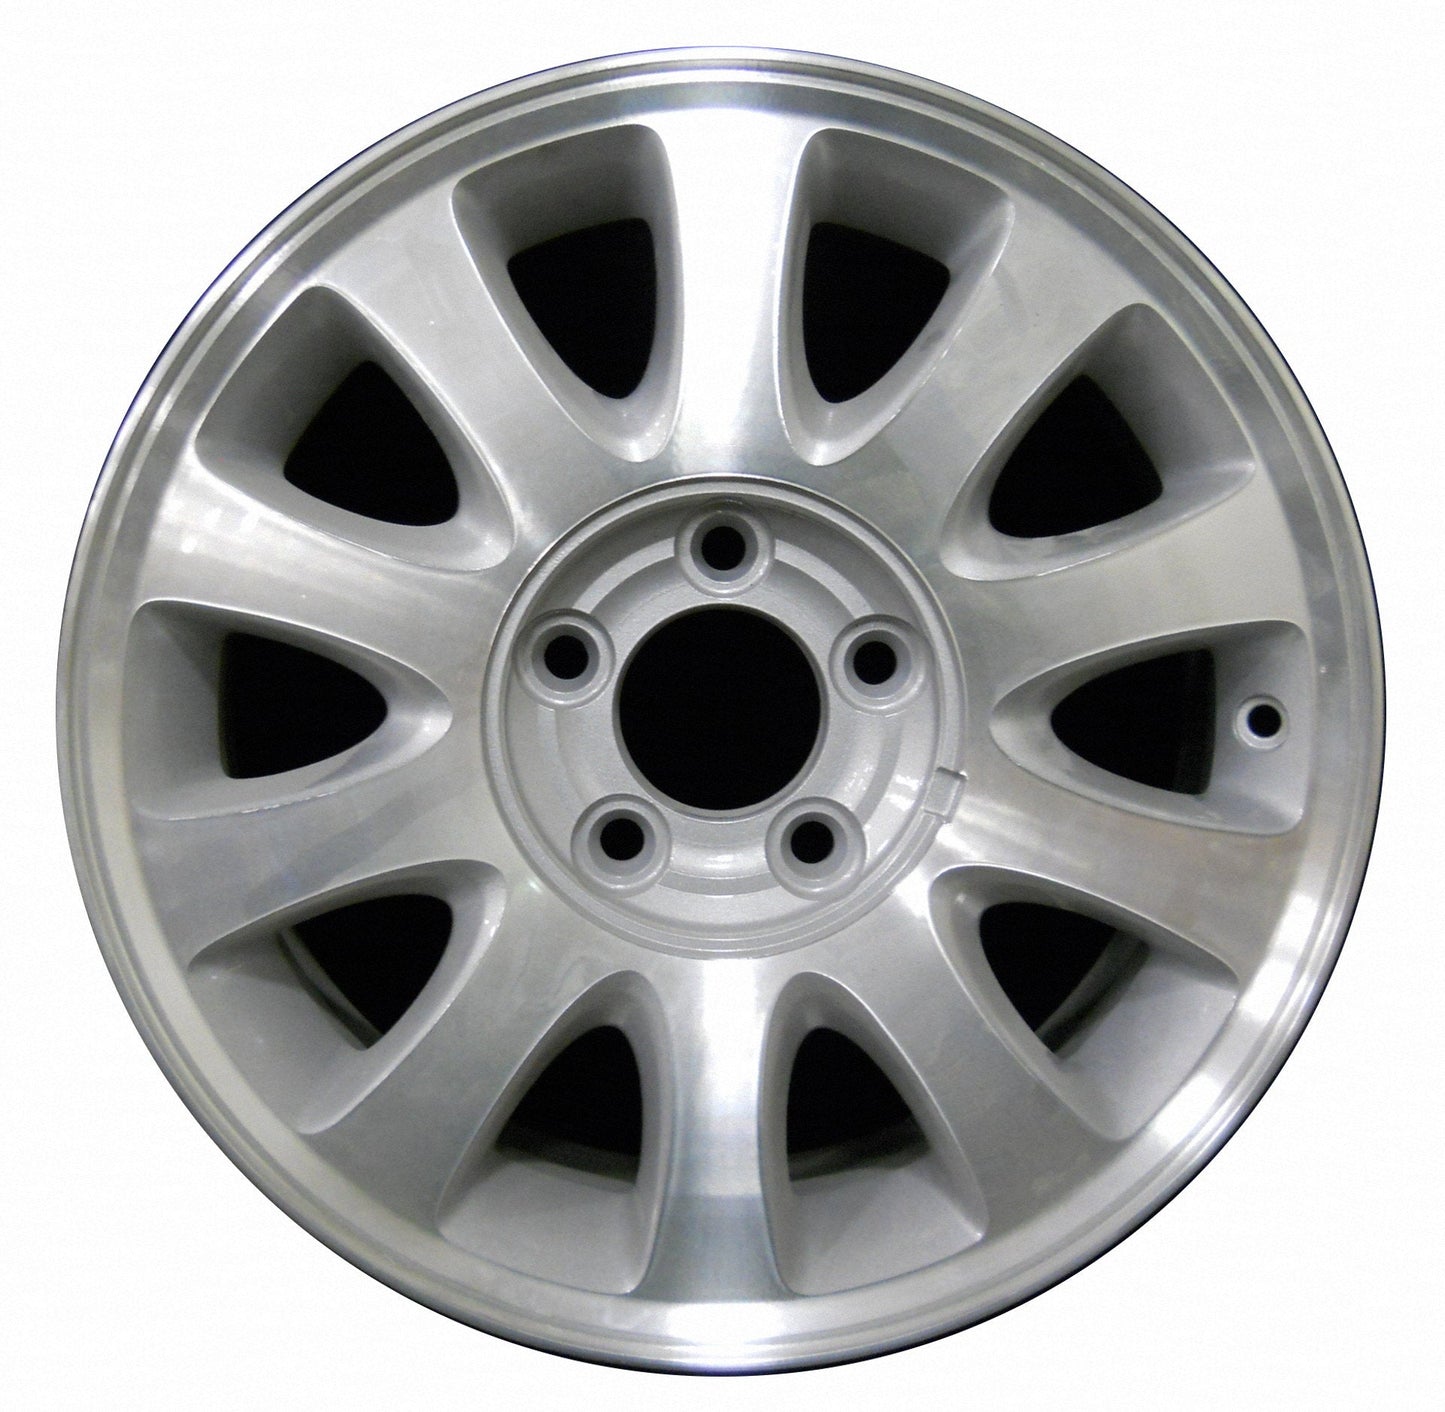 Chrysler Town & Country  2001, 2002, 2003 Factory OEM Car Wheel Size 16x6.5 Alloy WAO.2151.PS02.MA